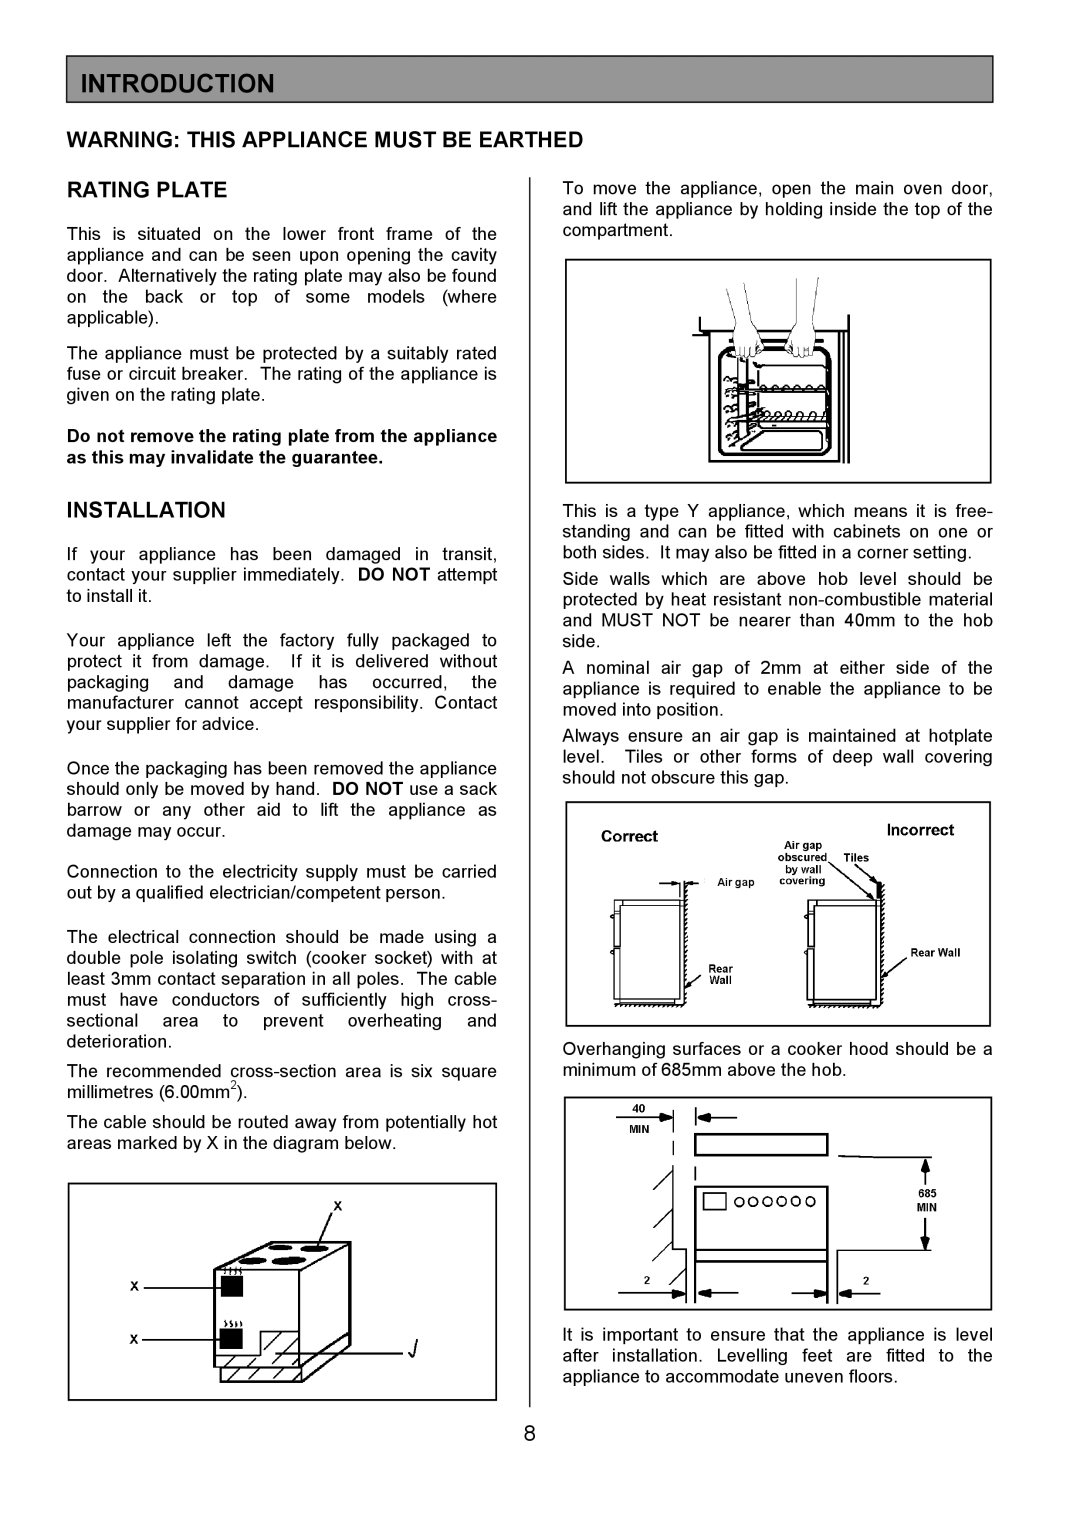 Tricity Bendix SIE401 installation instructions Introduction, Rating Plate, Installation 